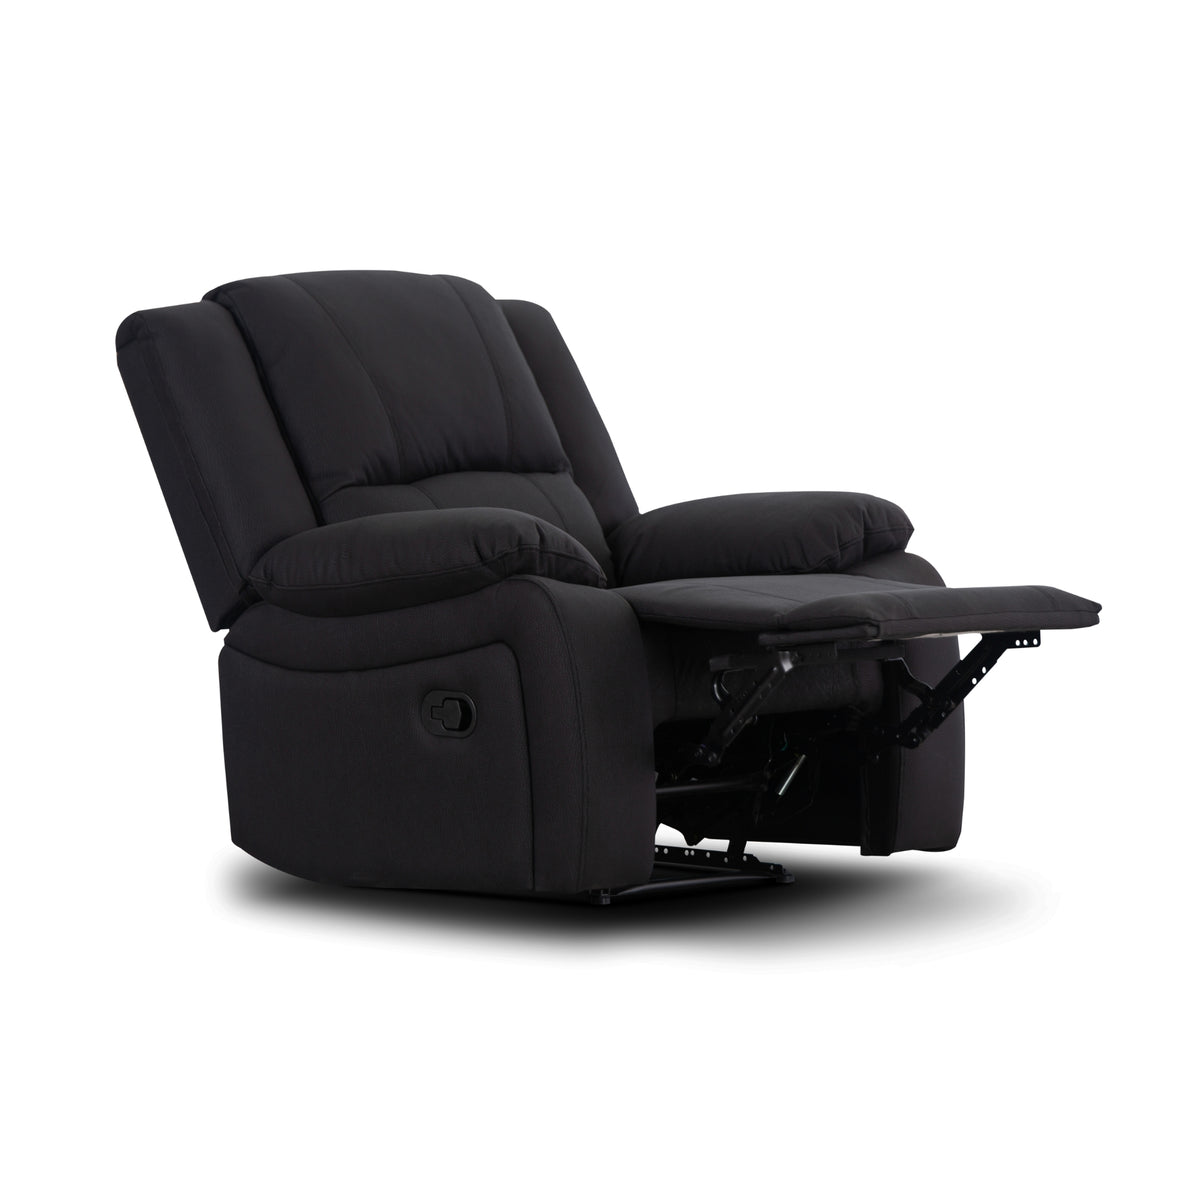 Anderson Fabric Electric Recliner Sofa Lounge Chair ONYX Black 1 + 2 Seater